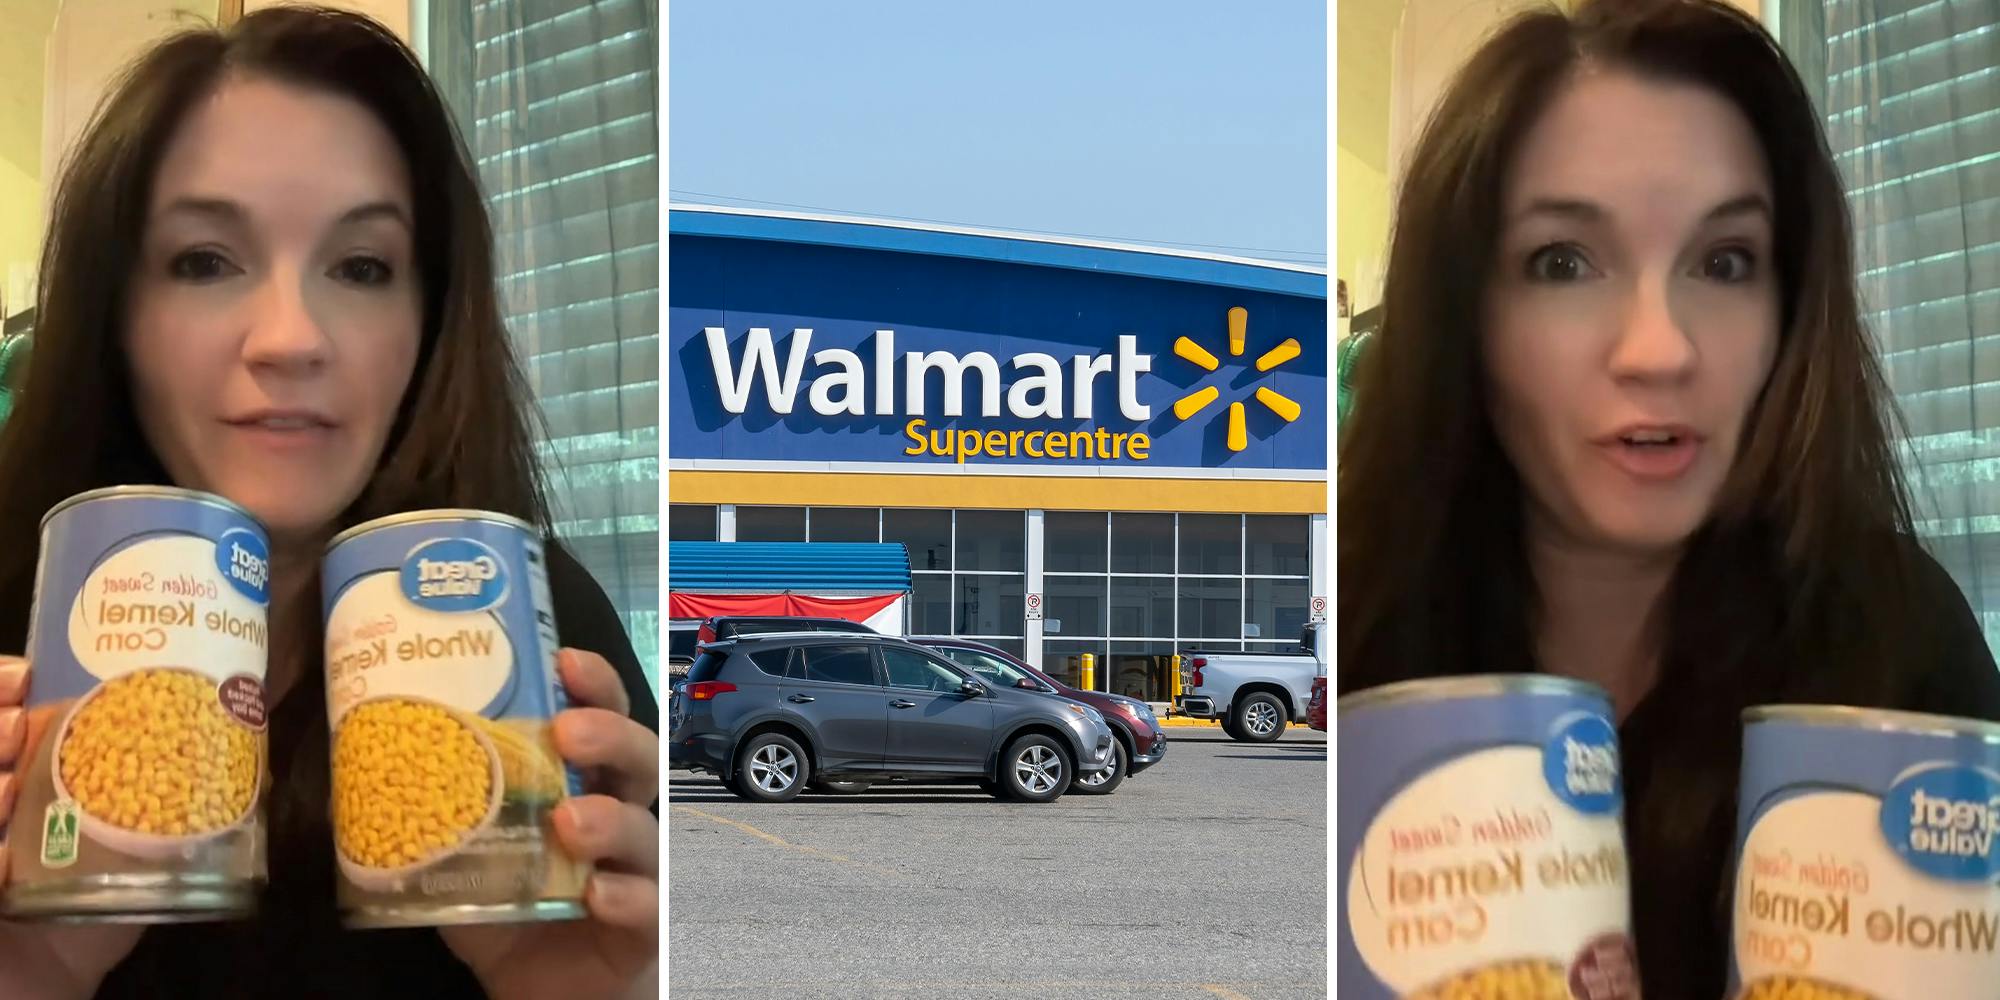 Walmart shopper discovers worrying label on new Great Value corn